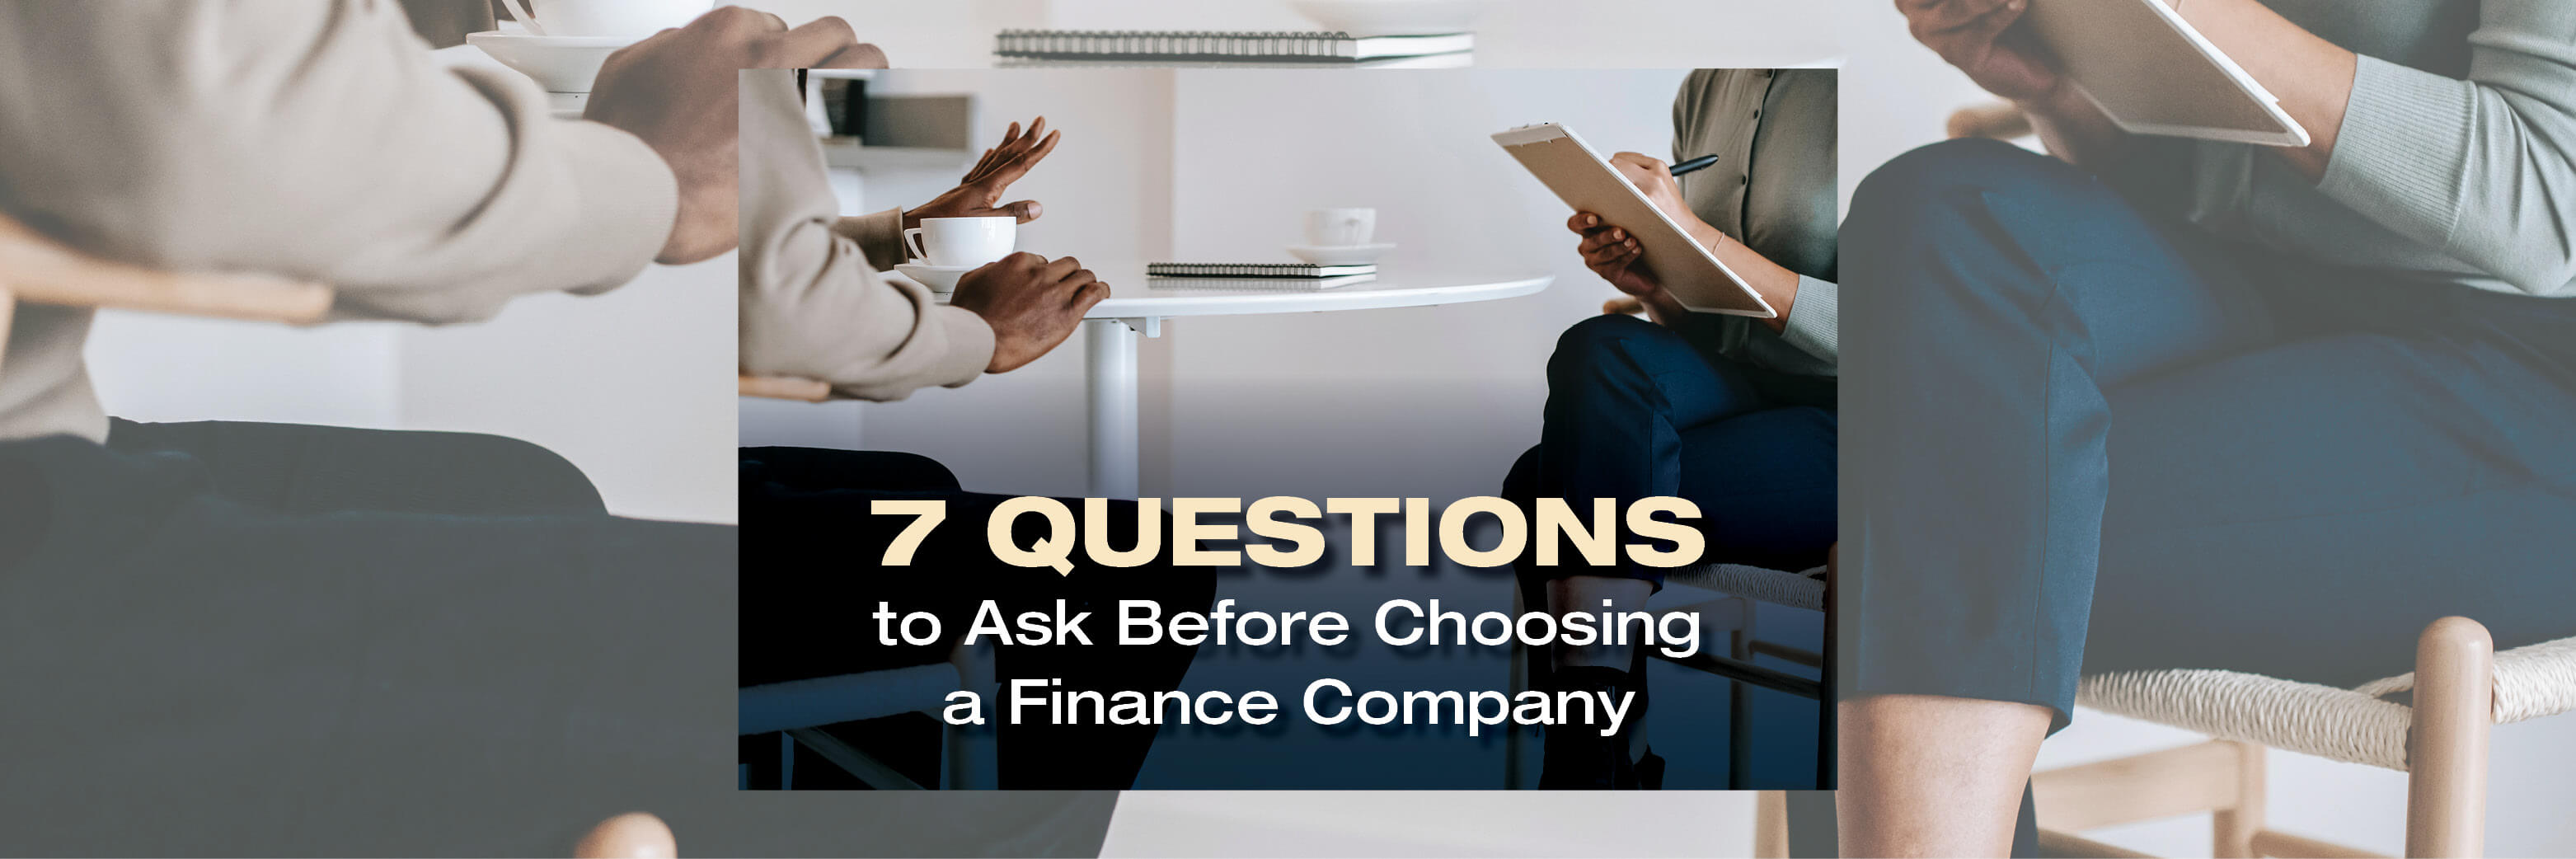 7 Questions to Ask Before Choosing a Finance Company